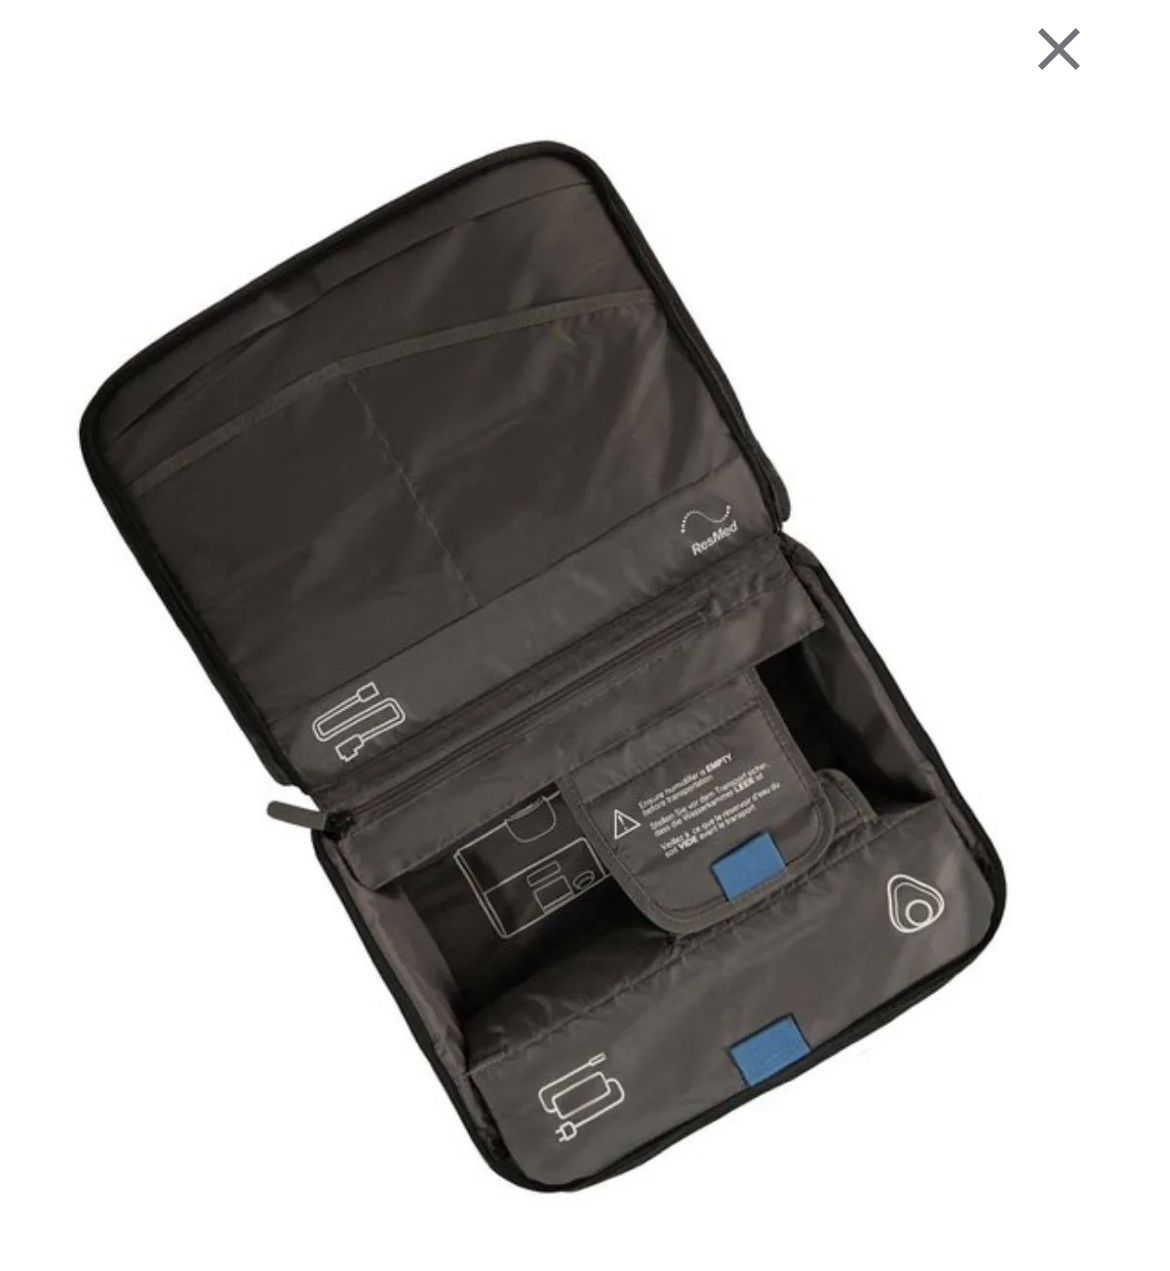 Details & Specs for ResMed Travel Bag for AirSense/AirCurve 10 Machines